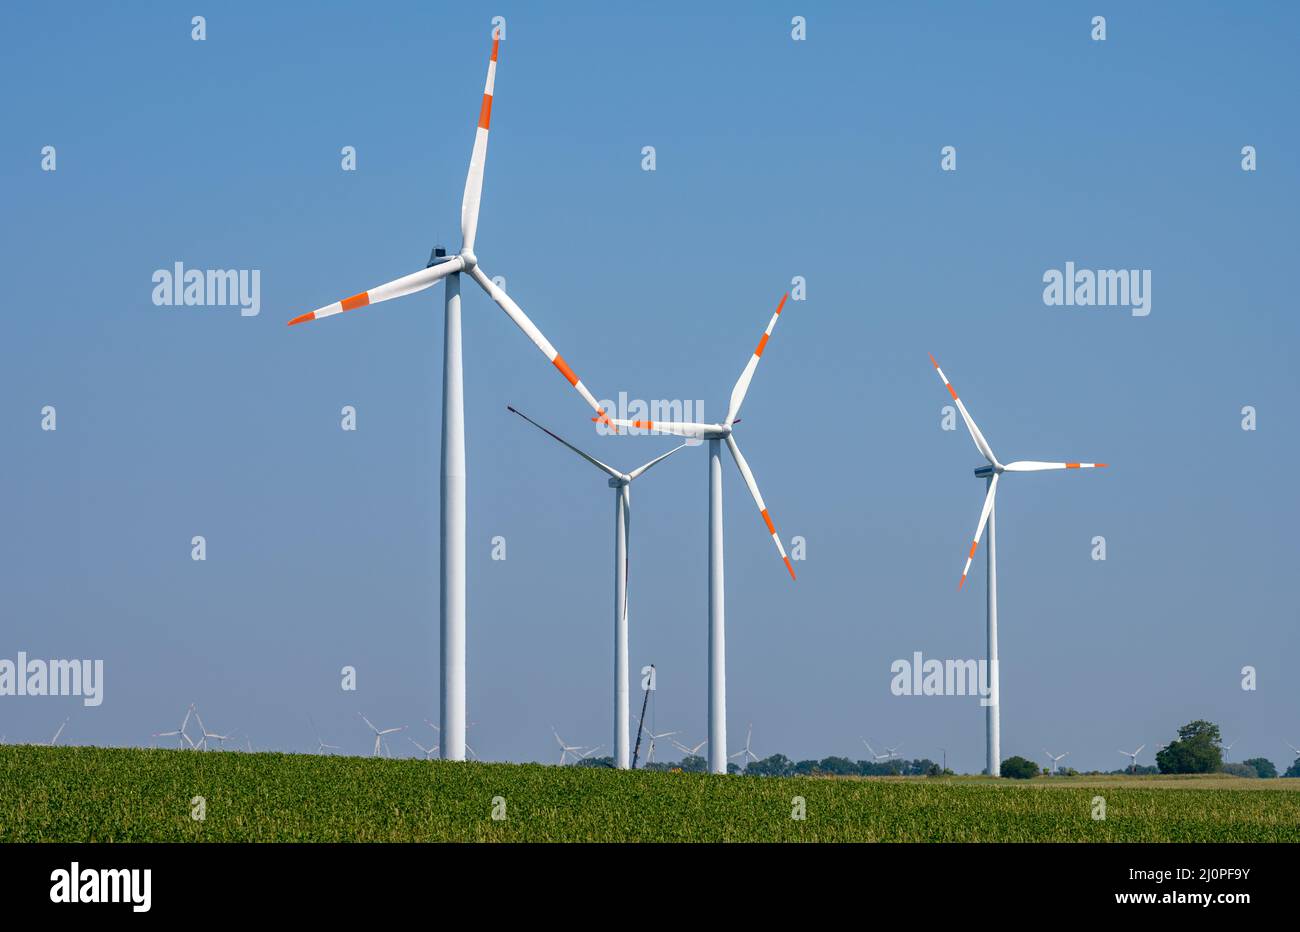 Modern wind power turbines with a clear blue sky seen in Germany Stock Photo